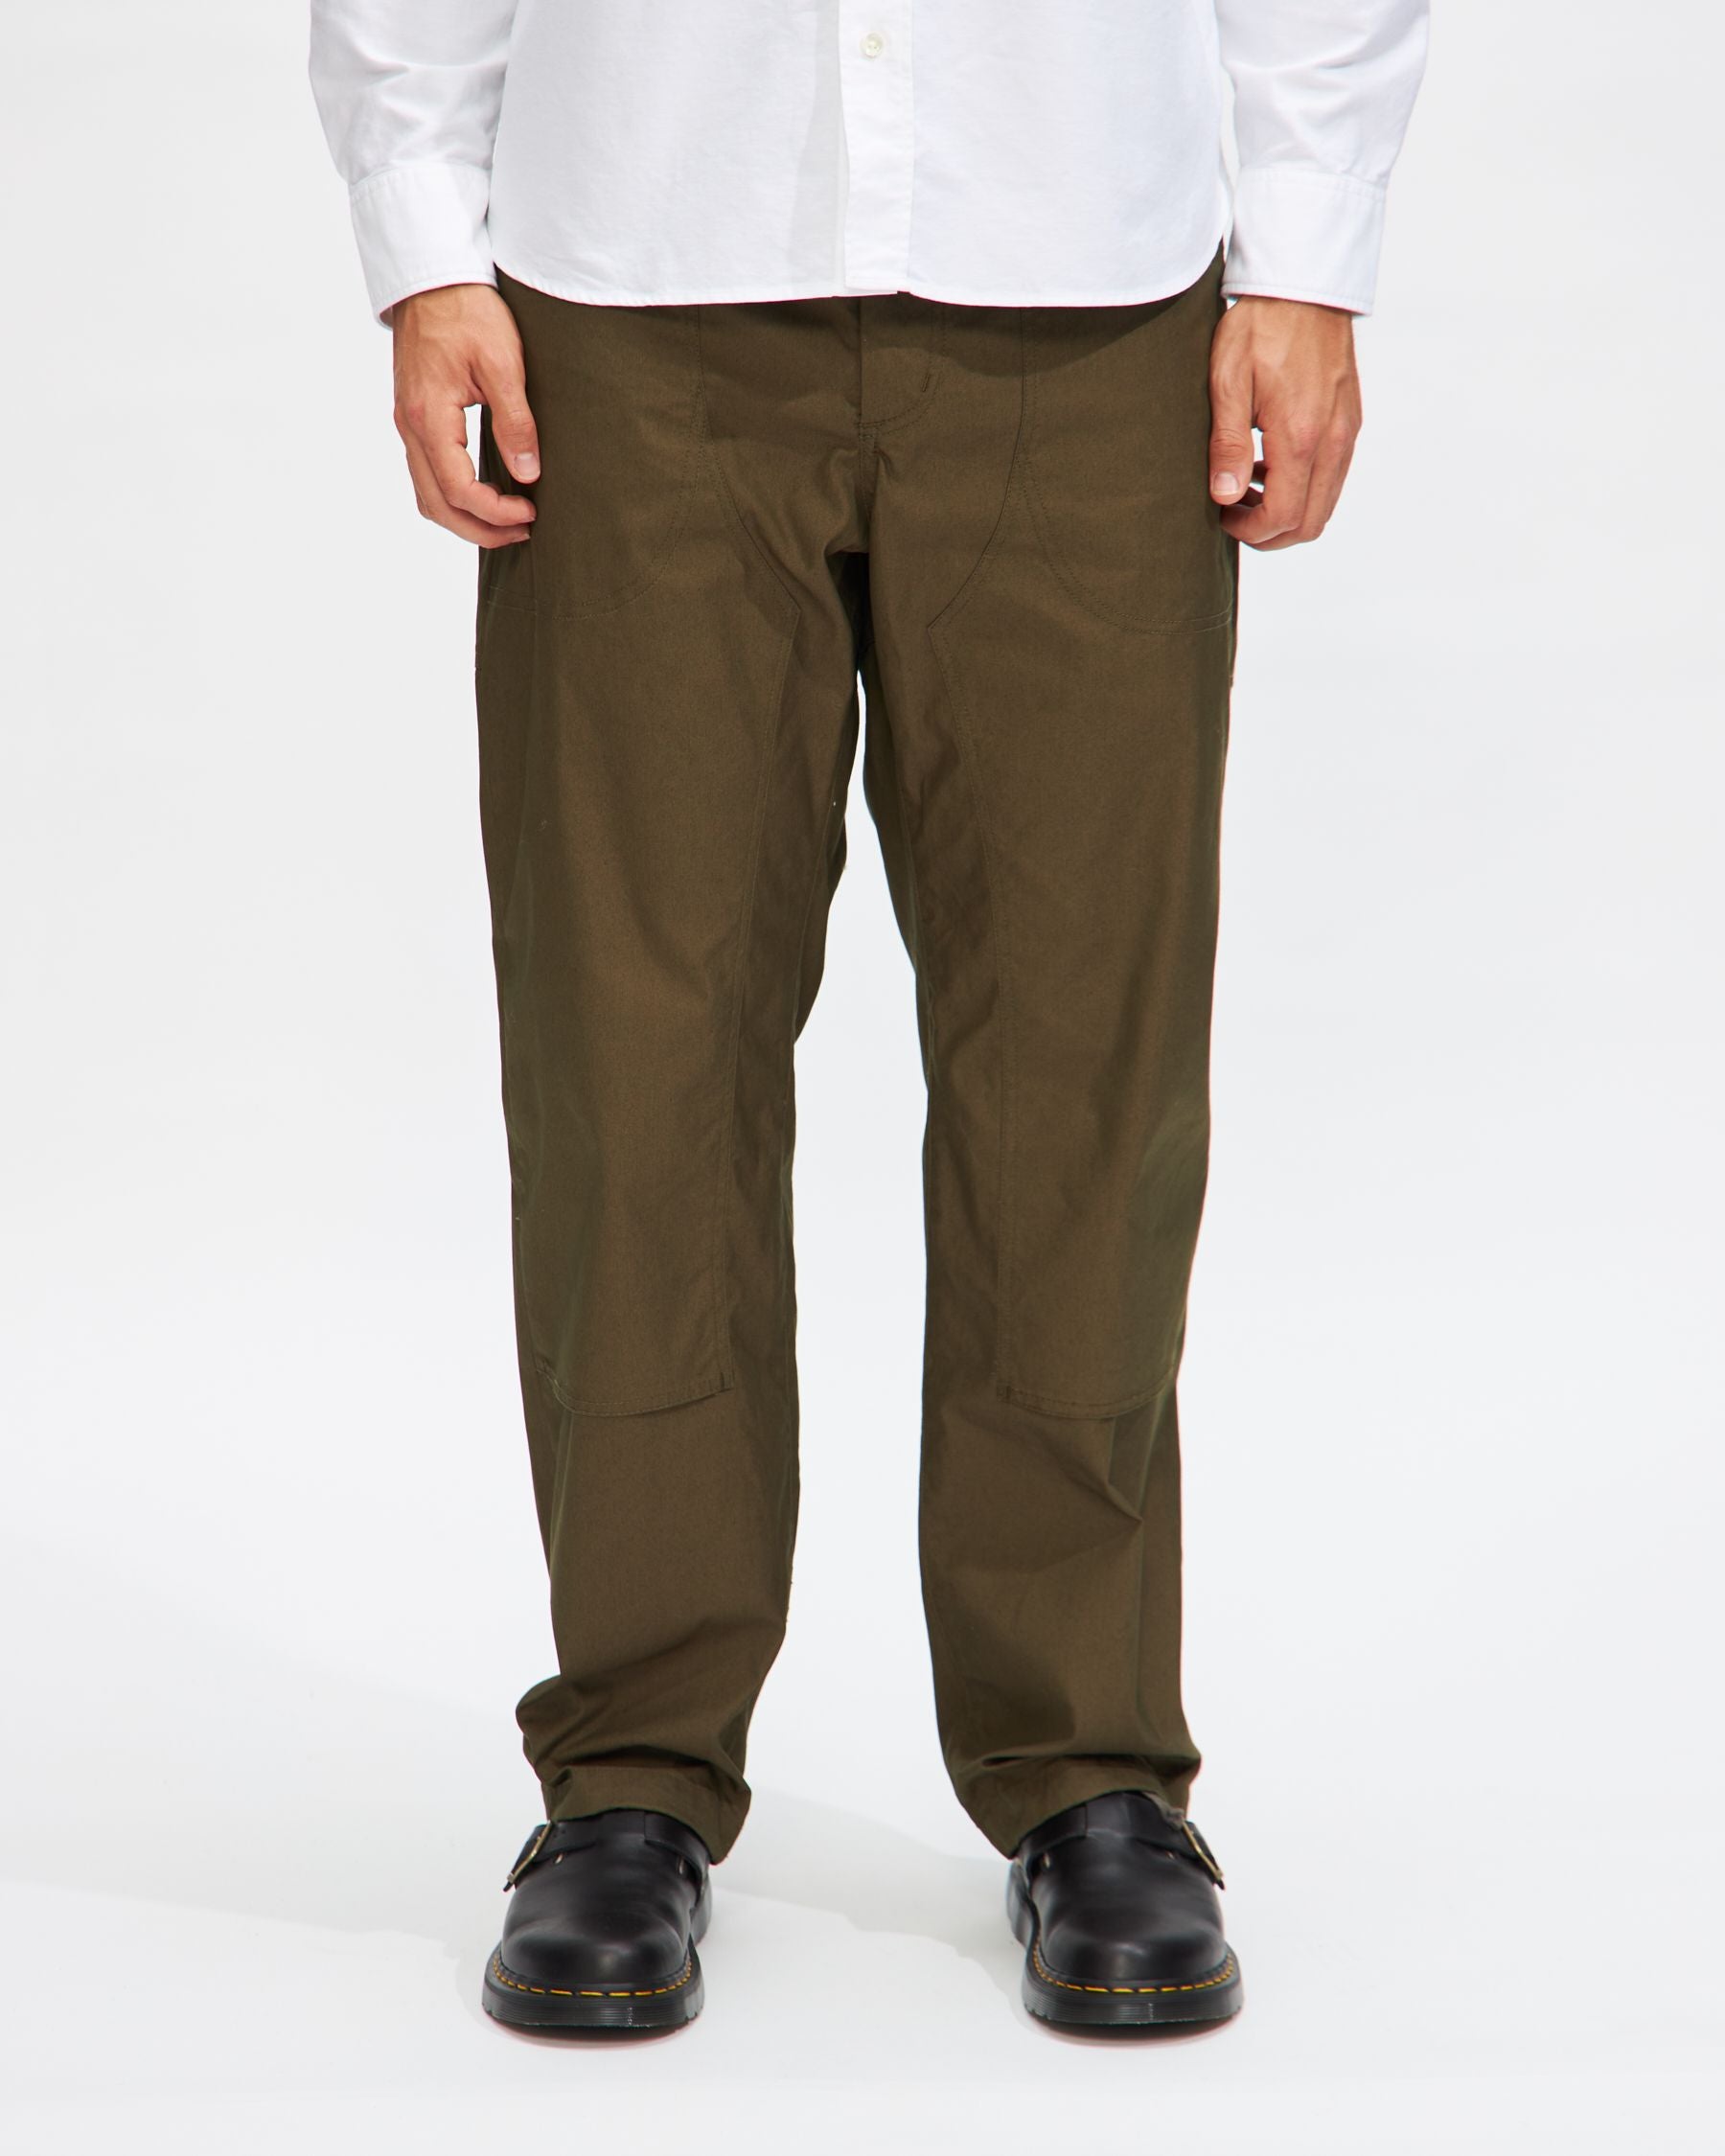 Climbing Pant in Olive CP Weather Poplin